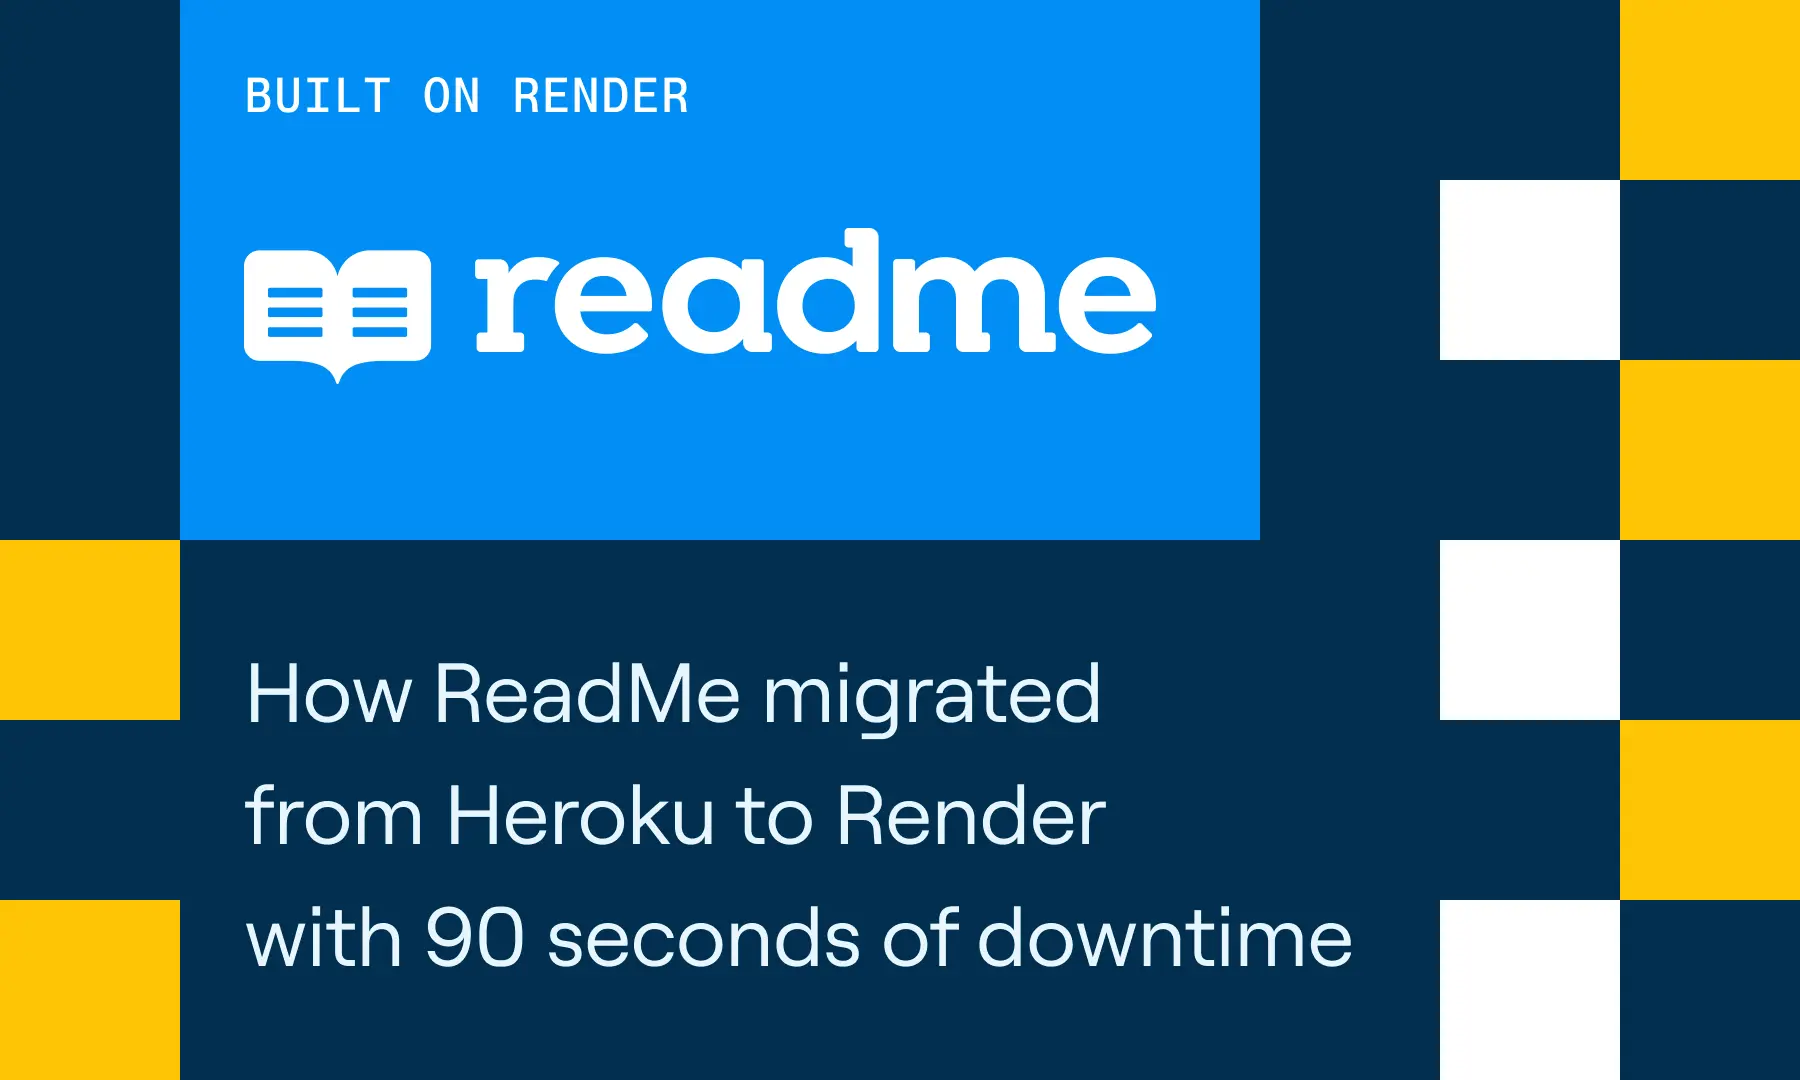 How ReadMe migrated from Heroku to Render with 90 seconds of downtime